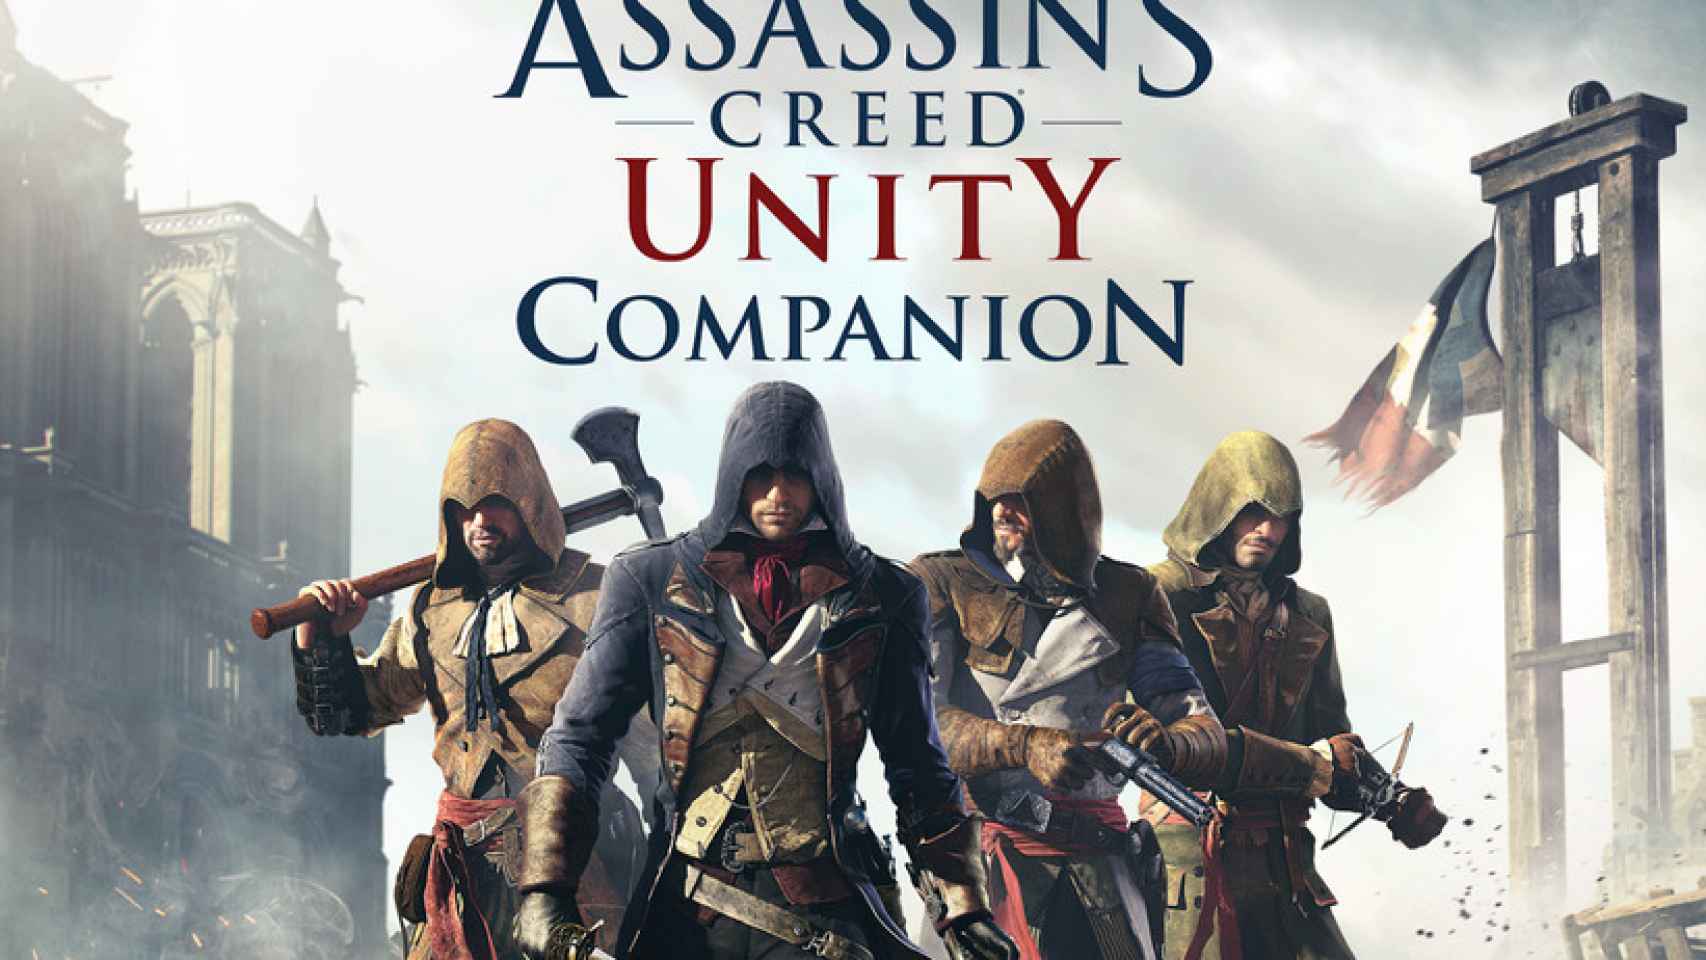 Assassin’s Creed Unity Companion ya disponible en Android